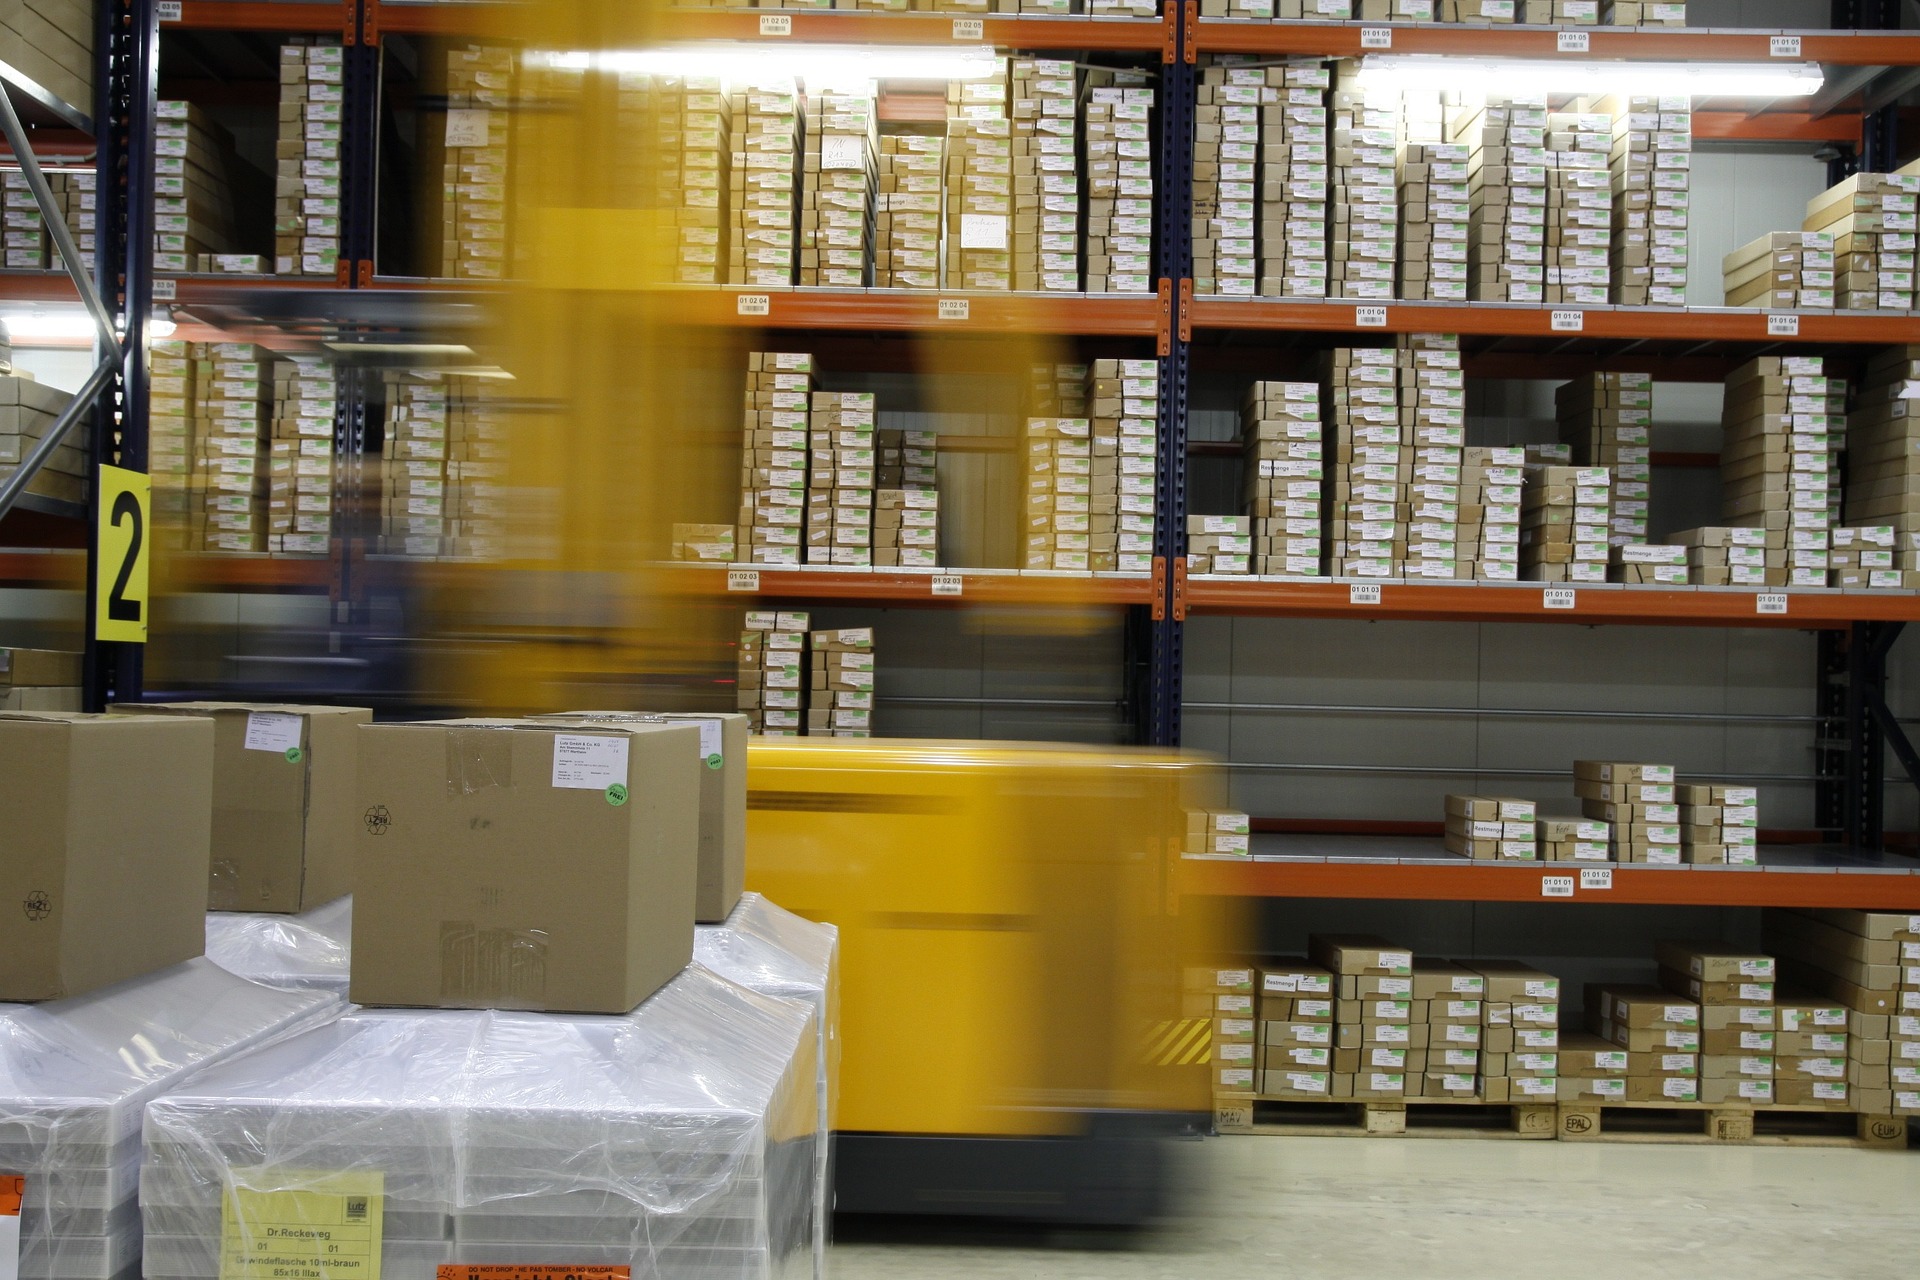 Online consumer demand continues to drive opportunities for the UK Logistics market